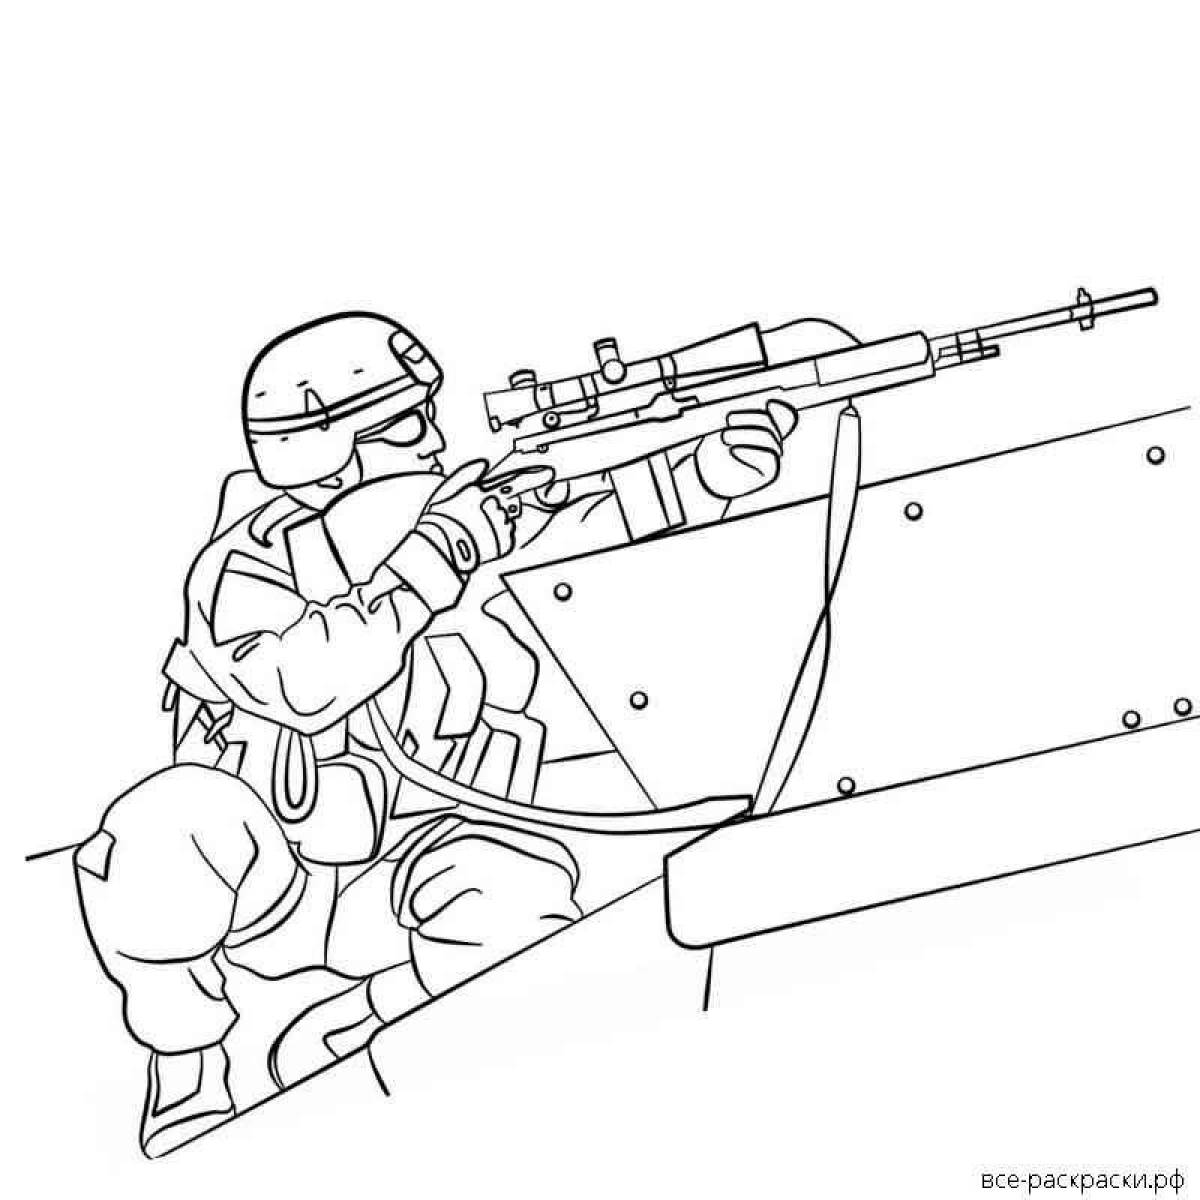 Dazzling special forces coloring pages for kids